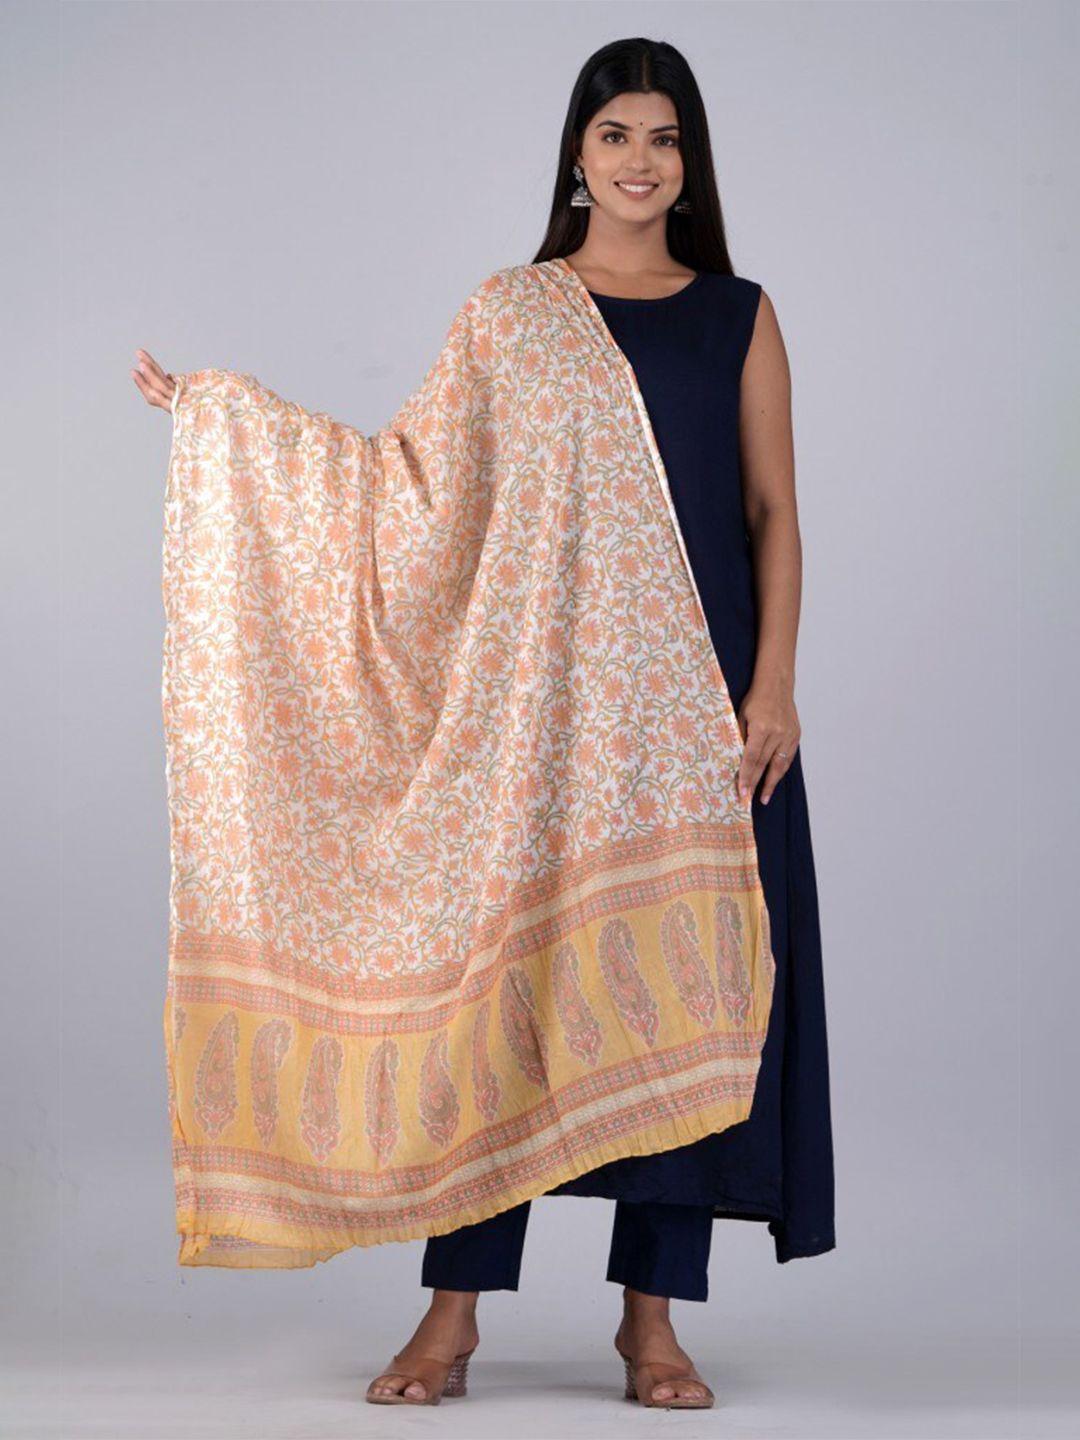 here&now-yellow-&-white-floral-printed-cotton-dupatta